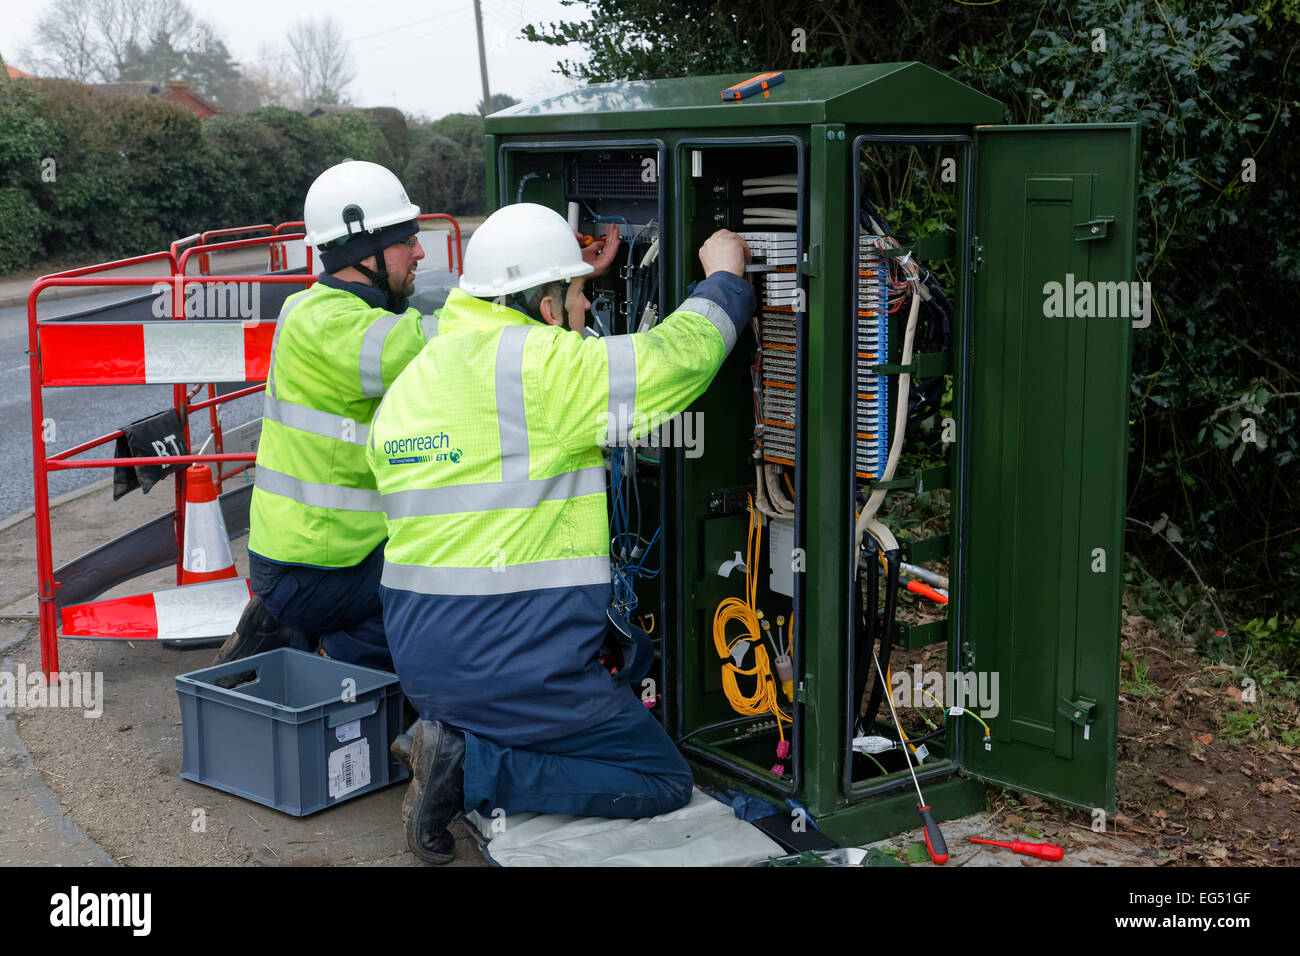 BT Openreach engineers working on a broadband internet fibre cabinet in the street Stock Photo